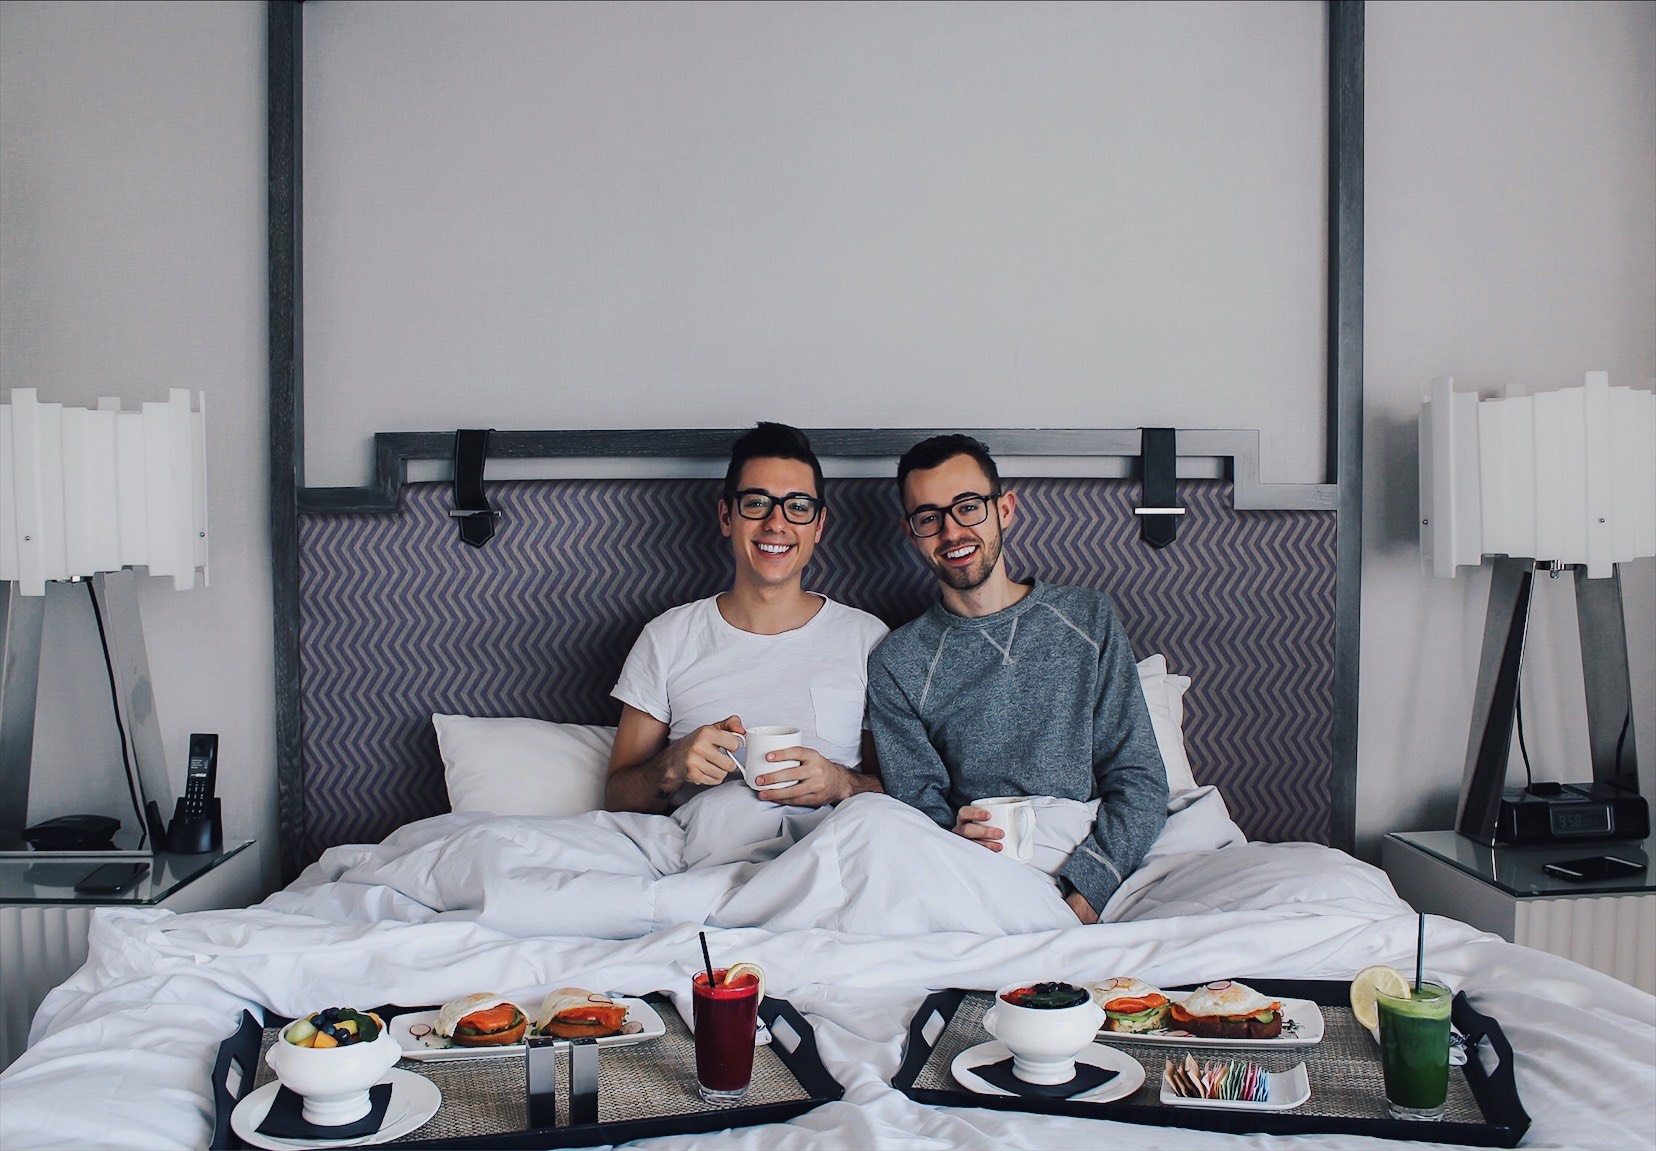 alex and mike breakfast in bed during staycation